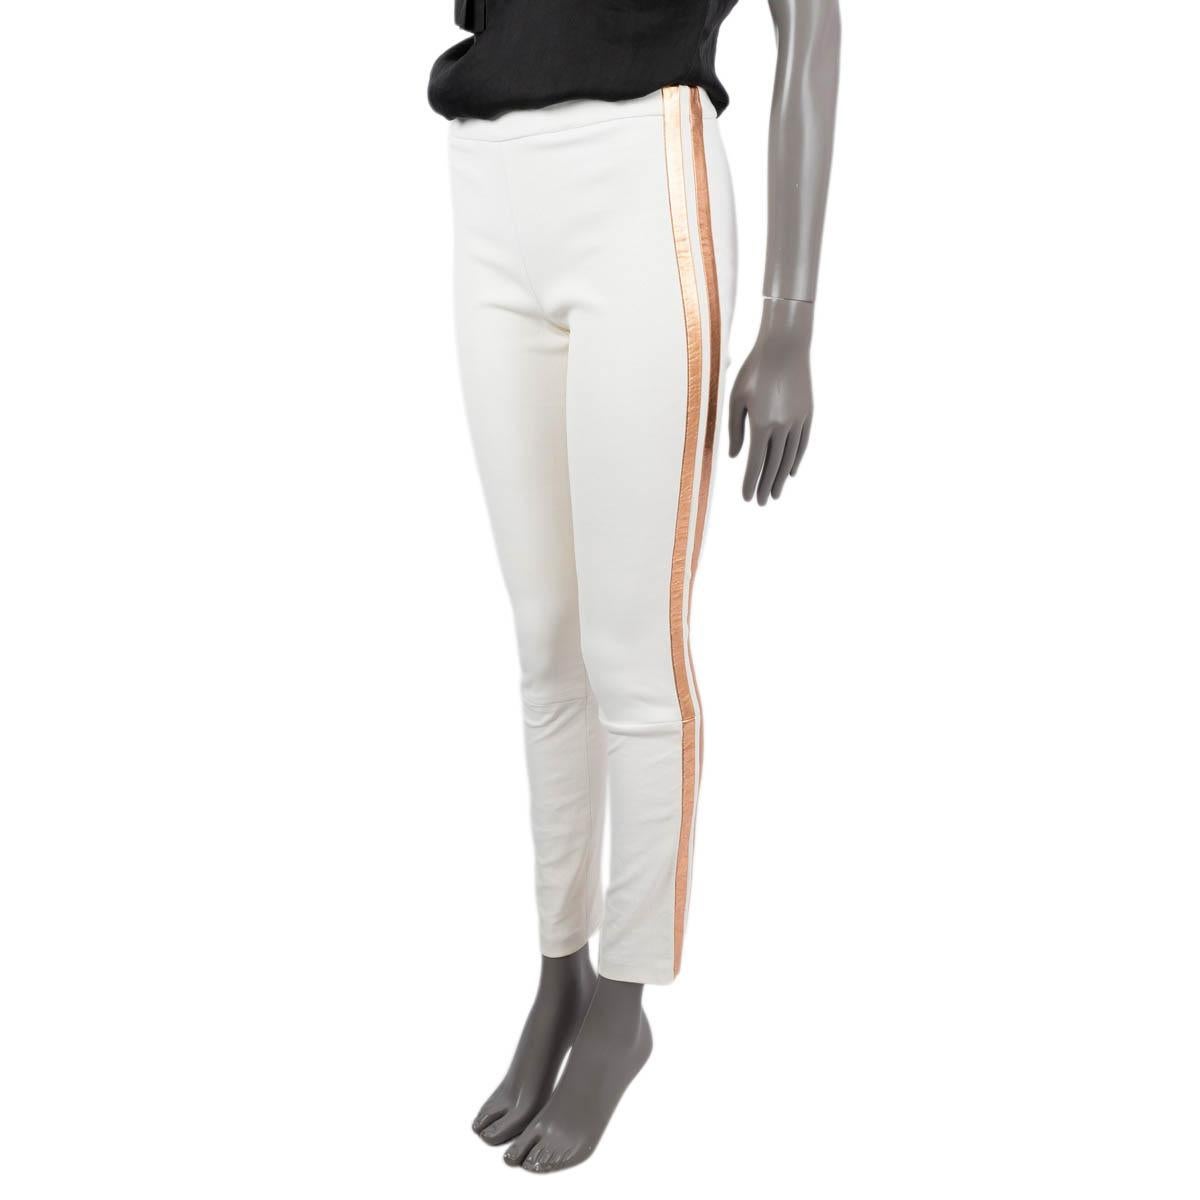 100% authenticHaider Ackermann leggings in ivory leather (please note size and content tag have been removed) with copper side-stripes. Elastic waist band. Have been worn and are in excellent condition.

Measurements
Tag Size	Missing
Size	S
Waist